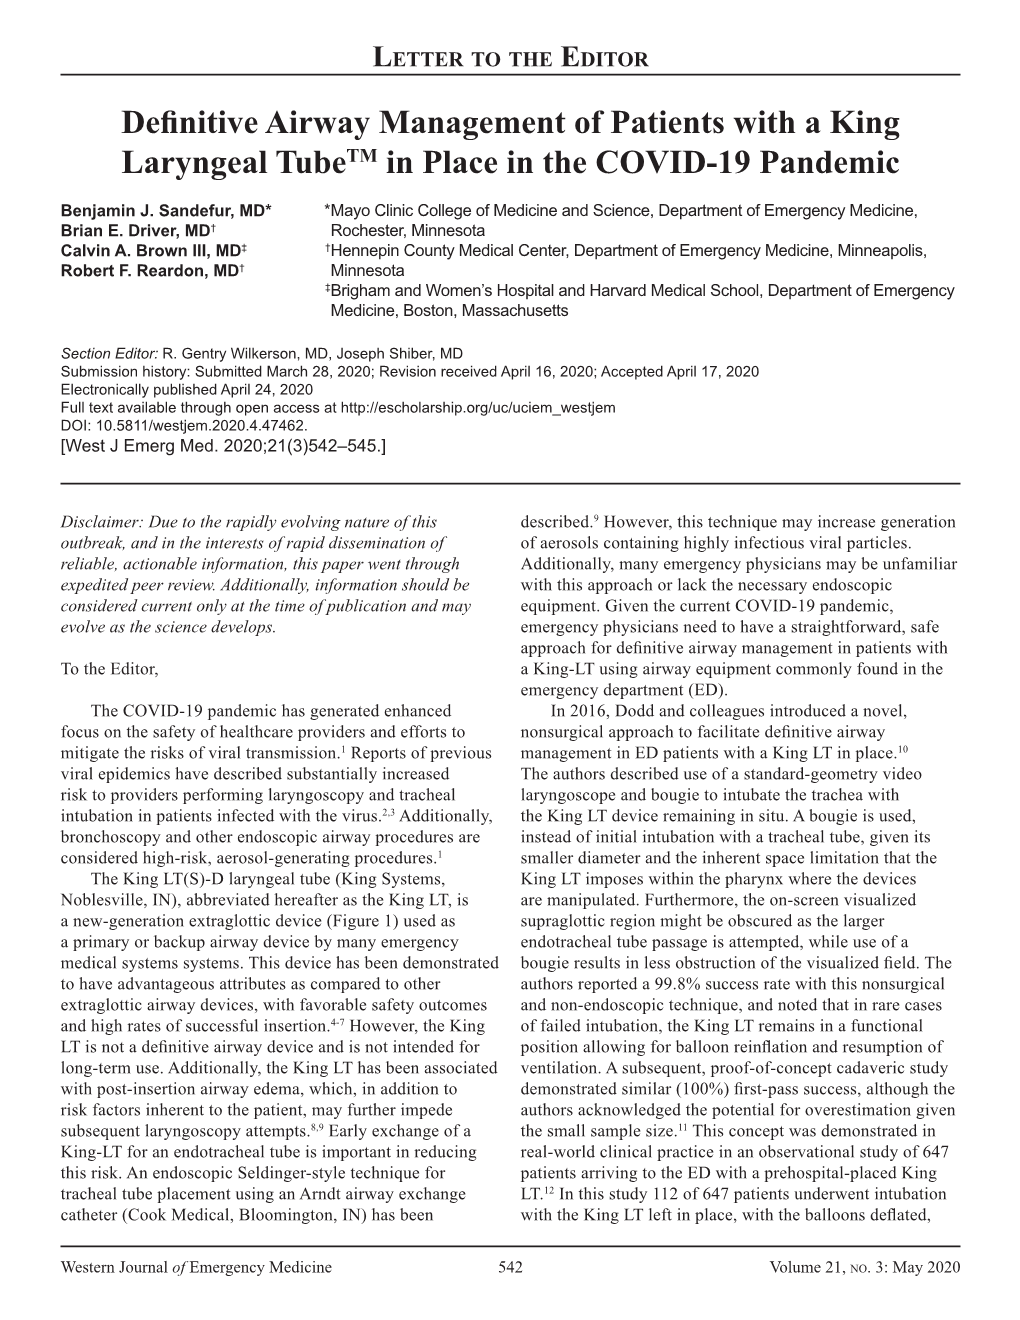 Definitive Airway Management of Patients with a King Laryngeal Tubetm in Place in the COVID-19 Pandemic